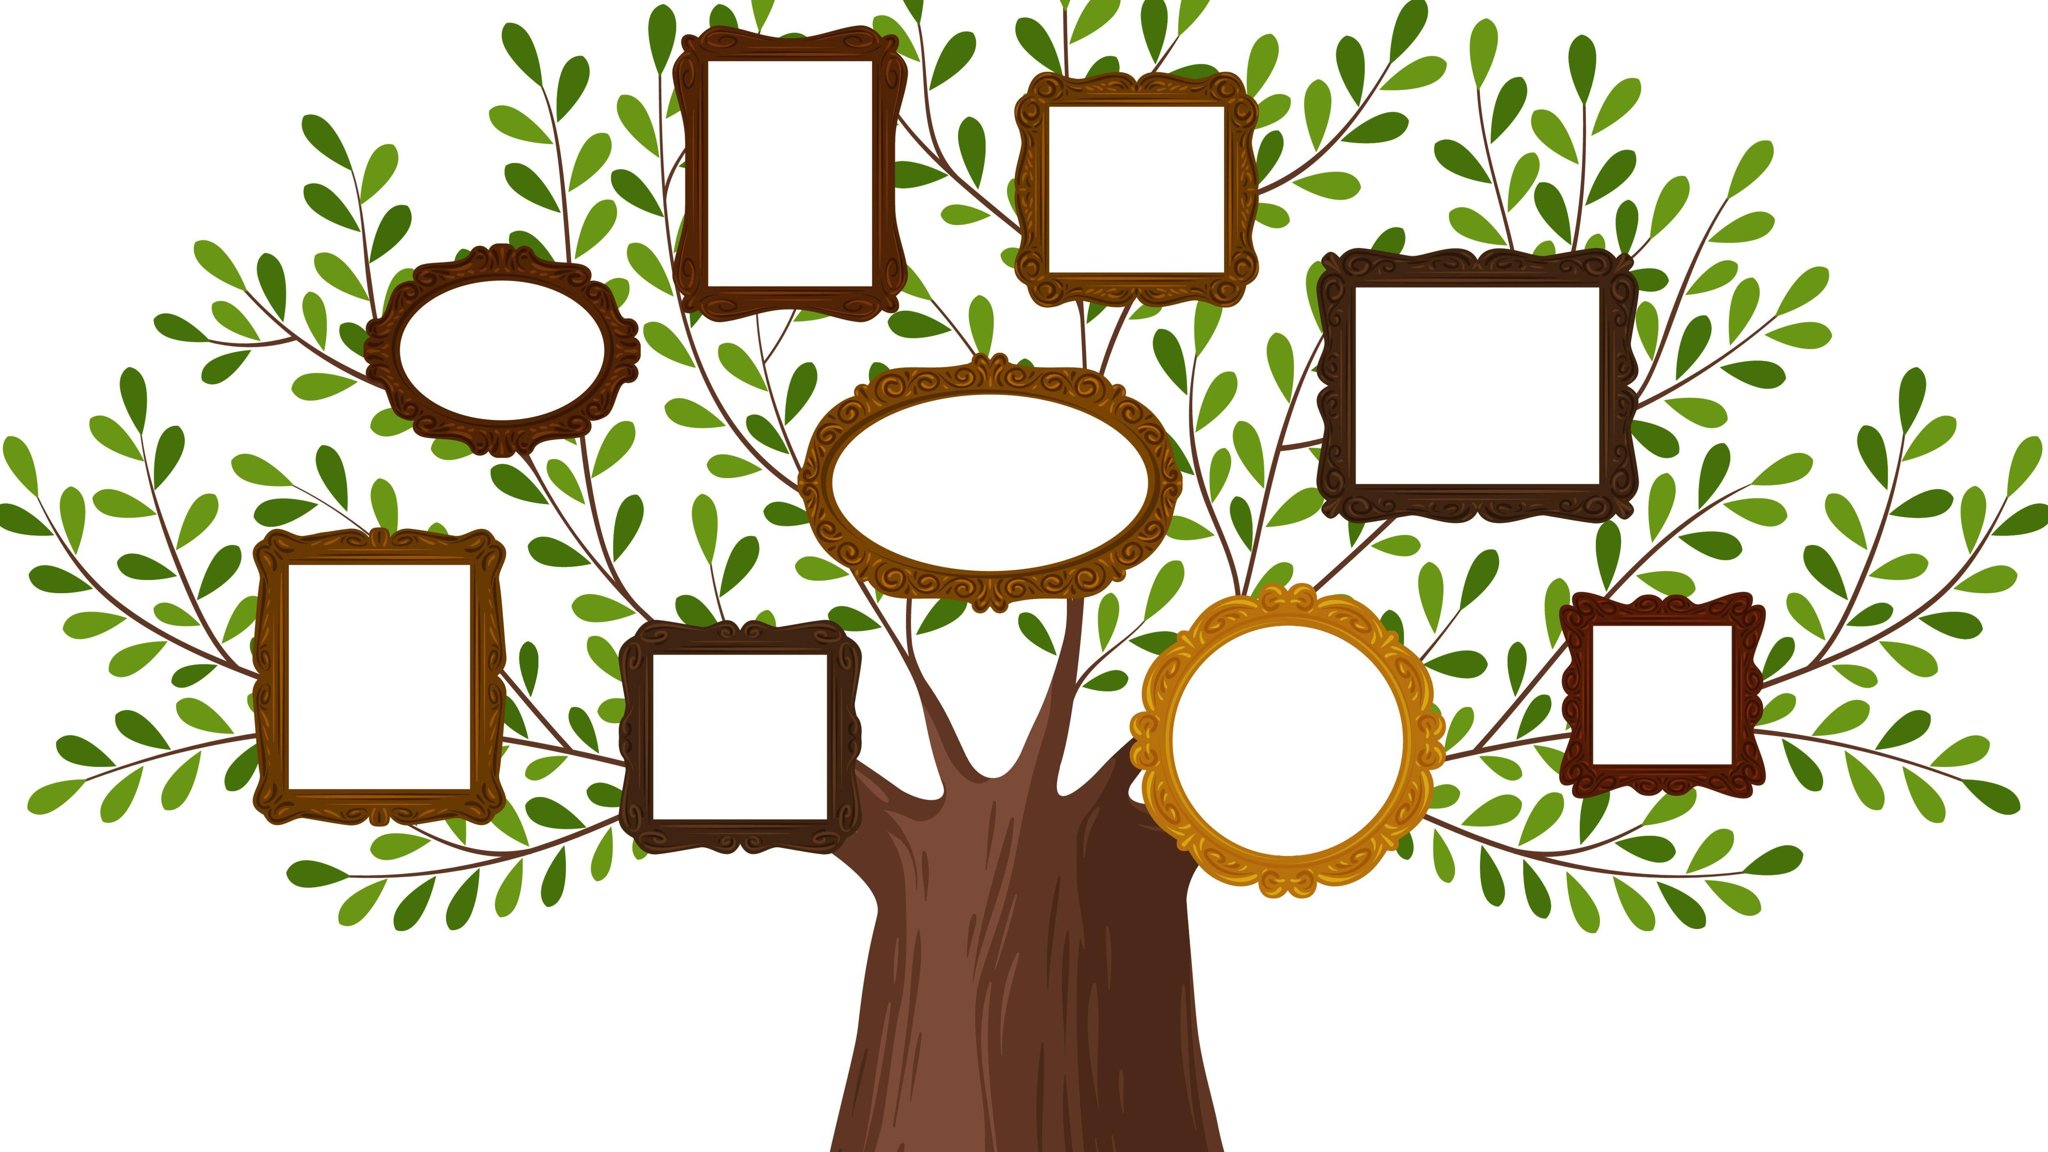 Kdpbgt Genealogical Family Tree With Picture Frames - Family Tree Of 10 People - HD Wallpaper 